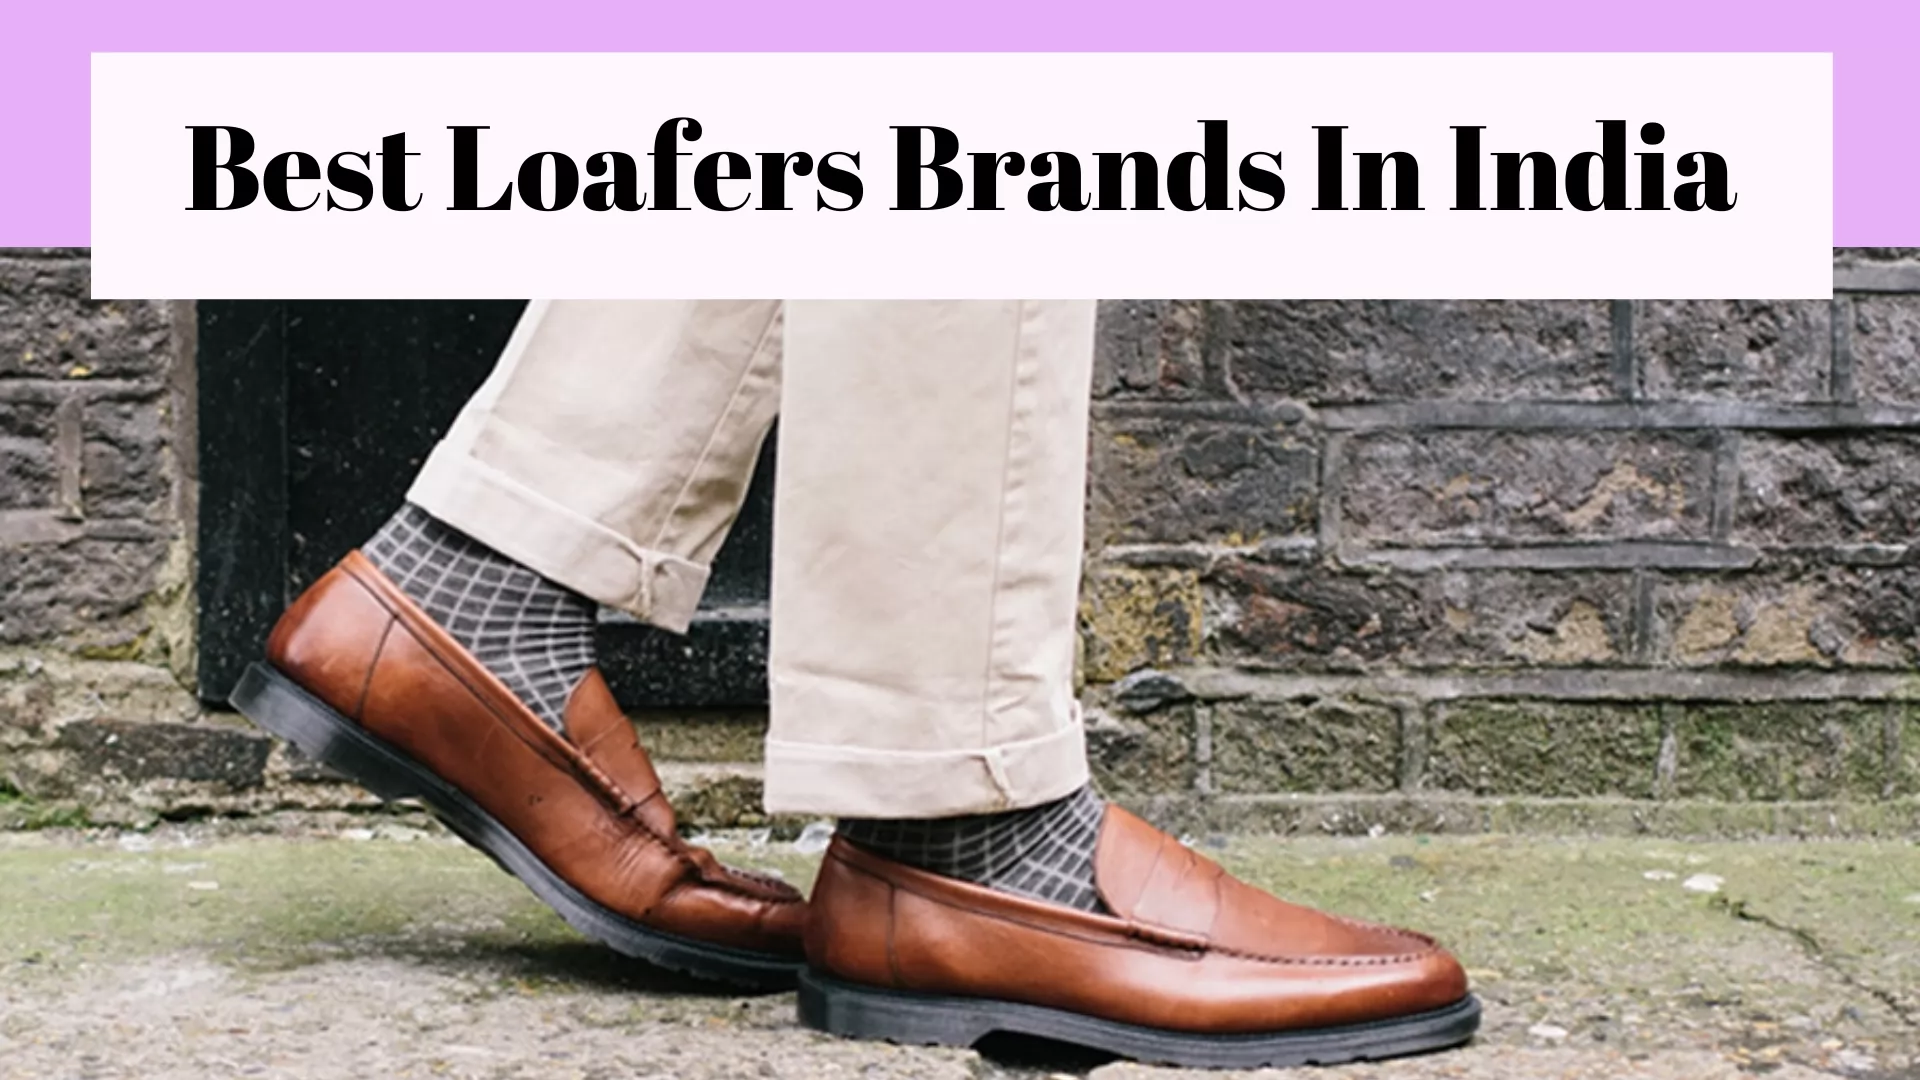 Best Loafers Brands In India